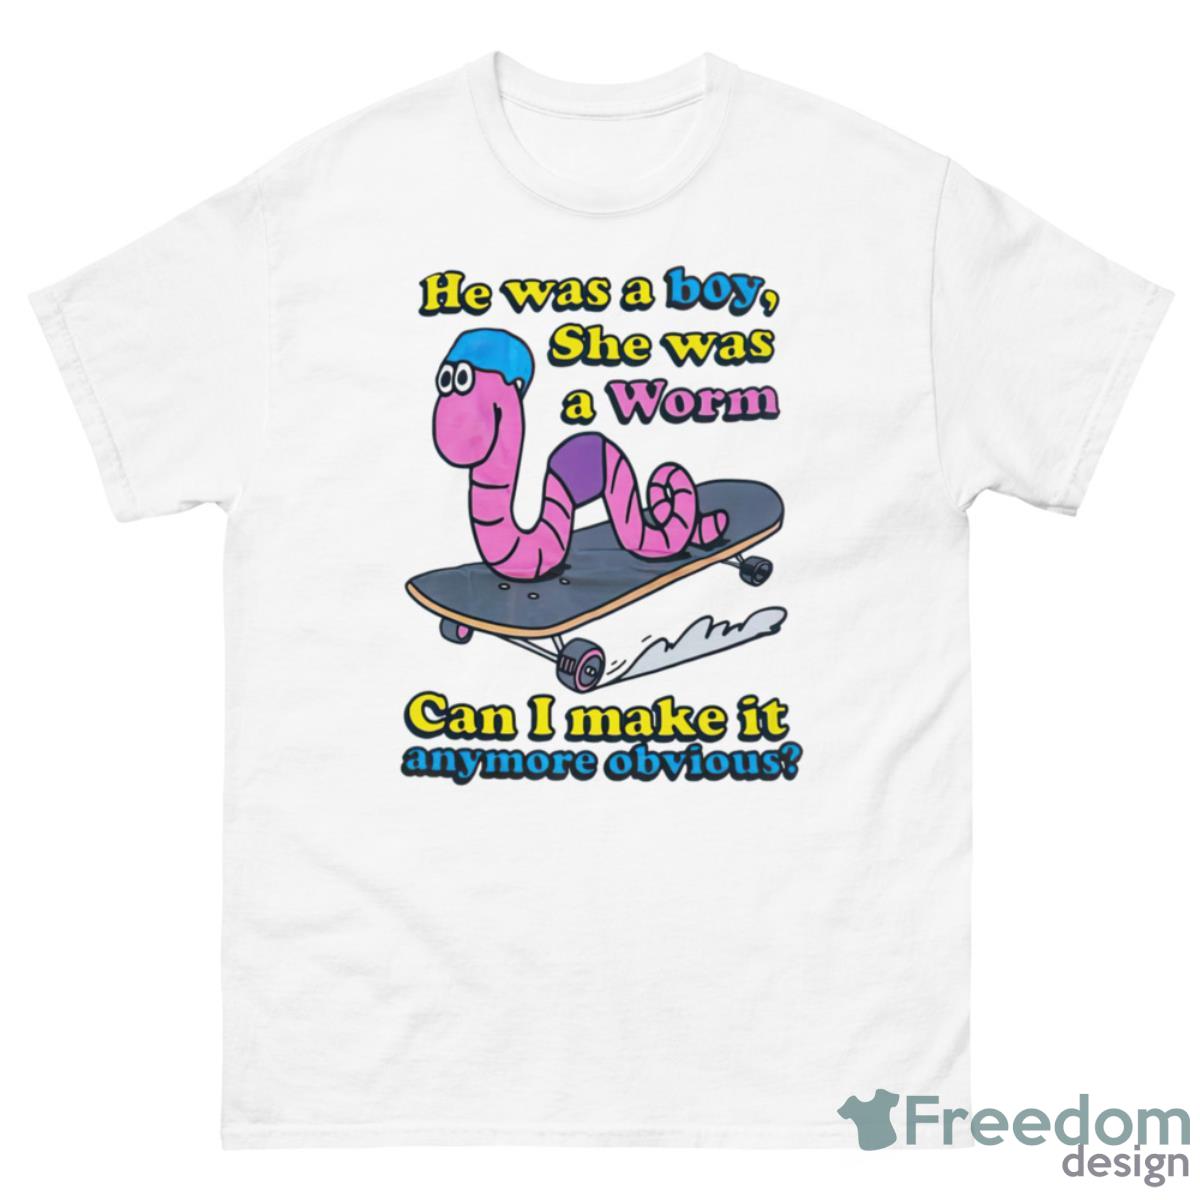 He Was A Boy She Was A Worm Can I Make It Anymore Obvious Shirt - 500 Men’s Classic Tee Gildan